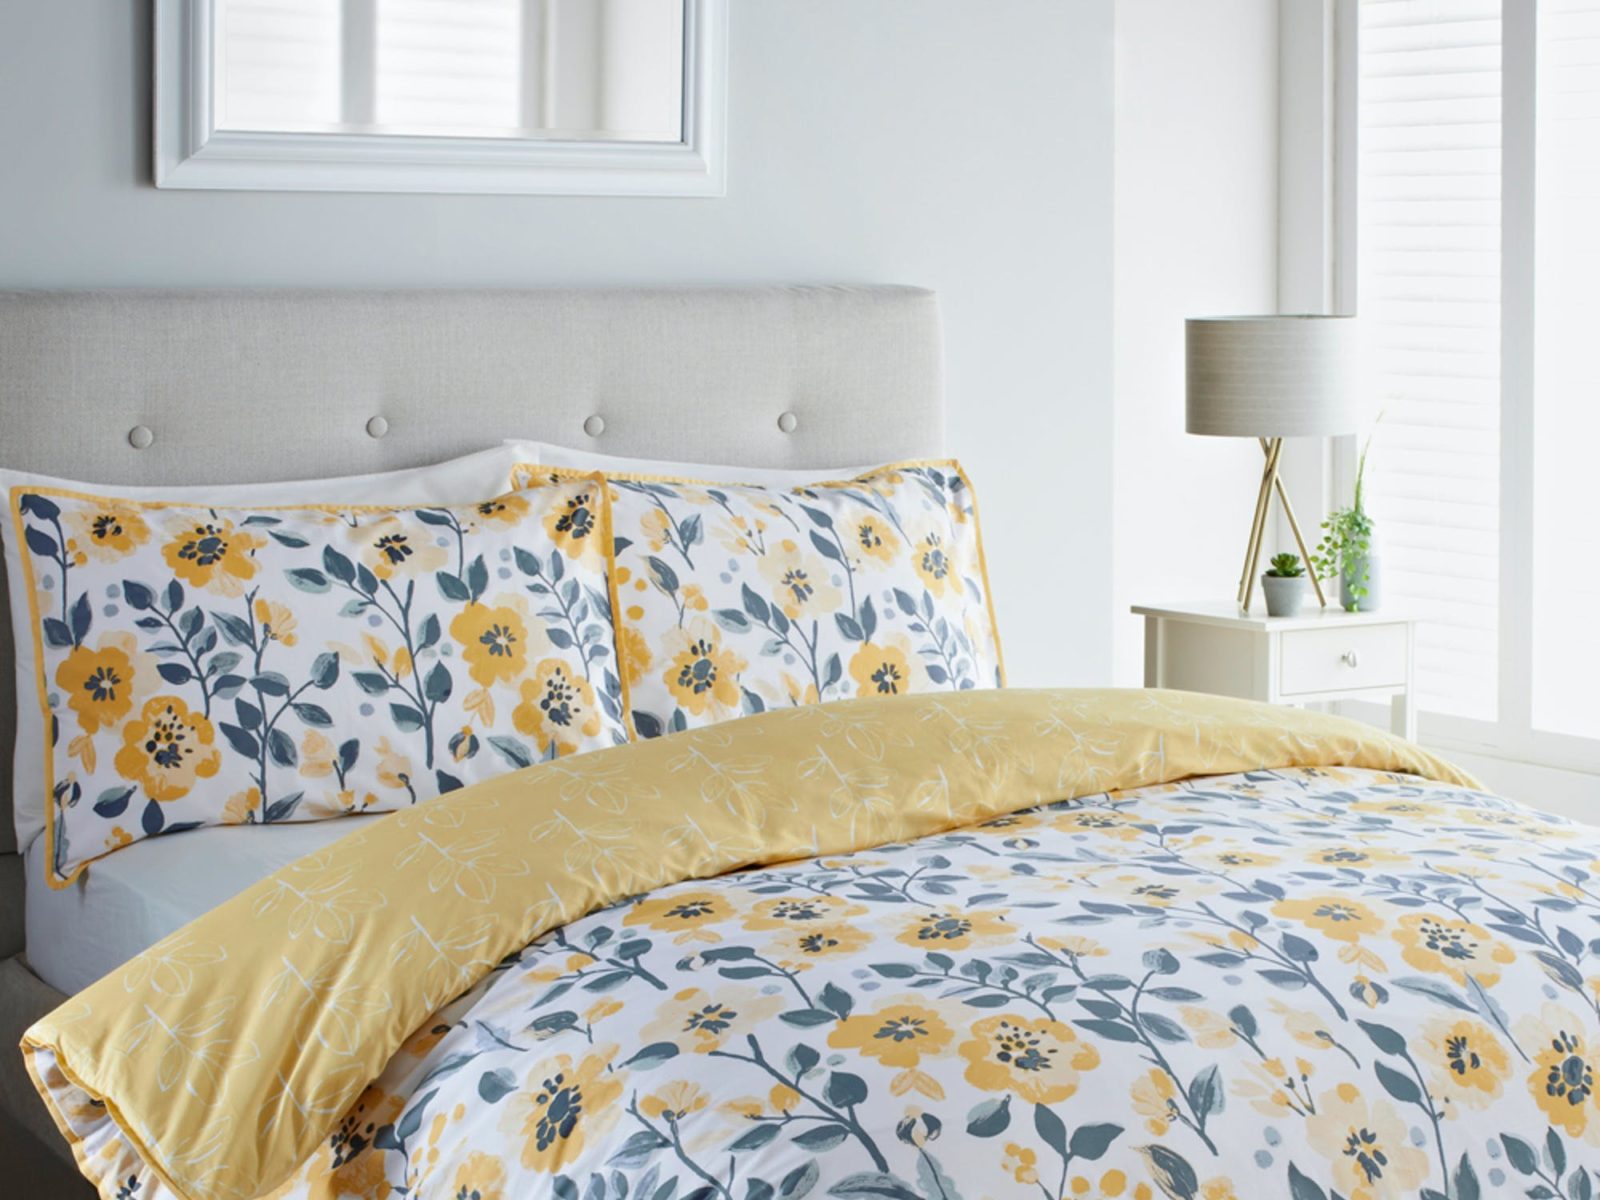 Reversible Yellow Floral Duvet Cover - £20.00 to £30.00